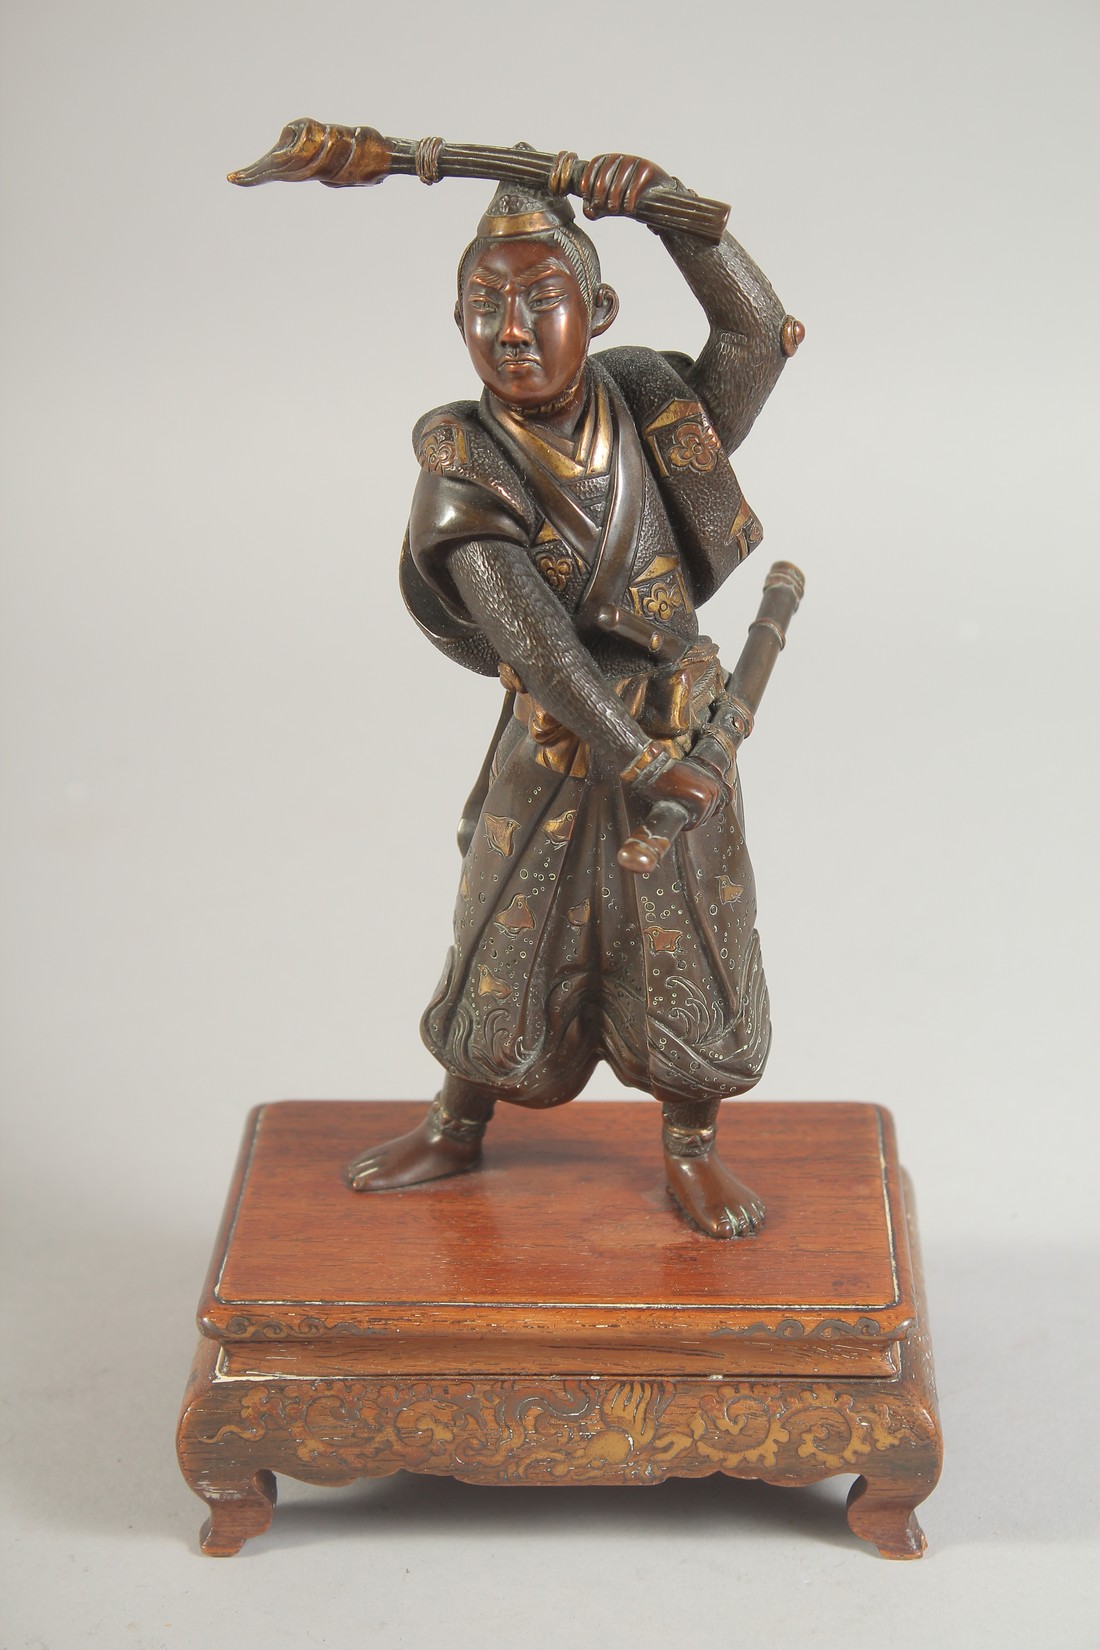 A FINE JAPANESE BRONZE OKIMONO of a warrior, signed Miyao Zo, mounted to a wooden base, 19.5cm